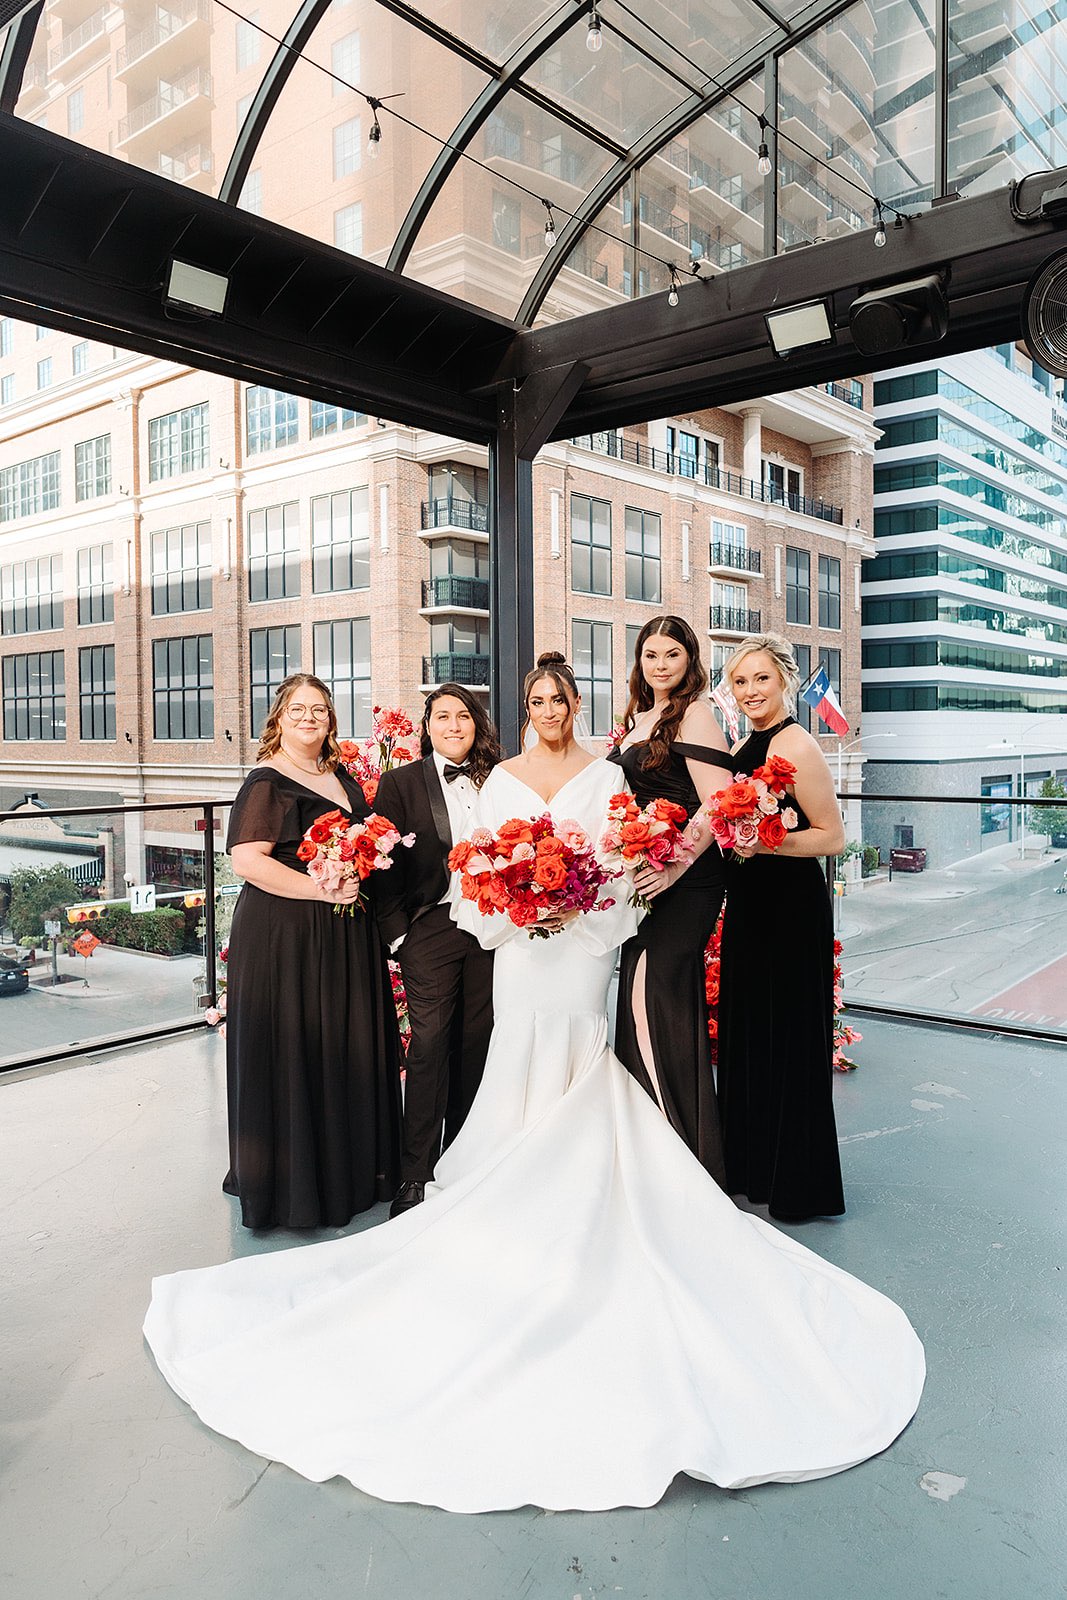 Bride with modern red bouquet with her wedding party